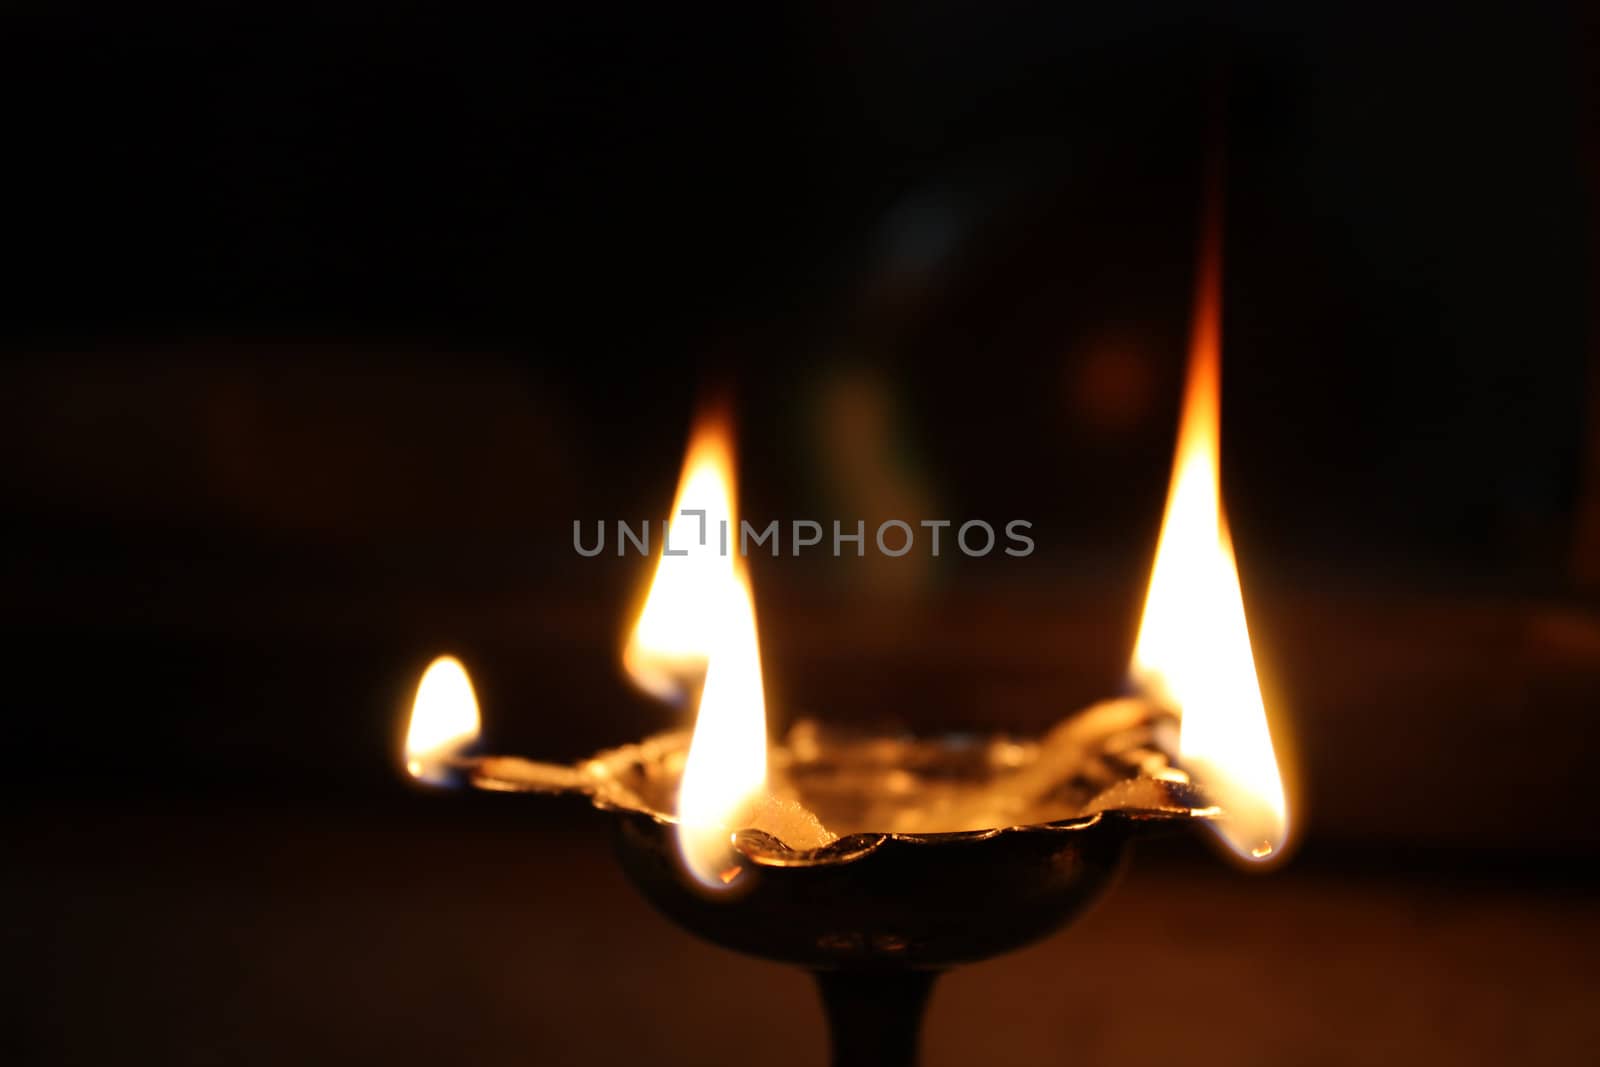 A traditional holy oil-lamp lit in a Hindu temple. The lamp is made of a long metal stem & floral bowl, with five places for wick / flames.